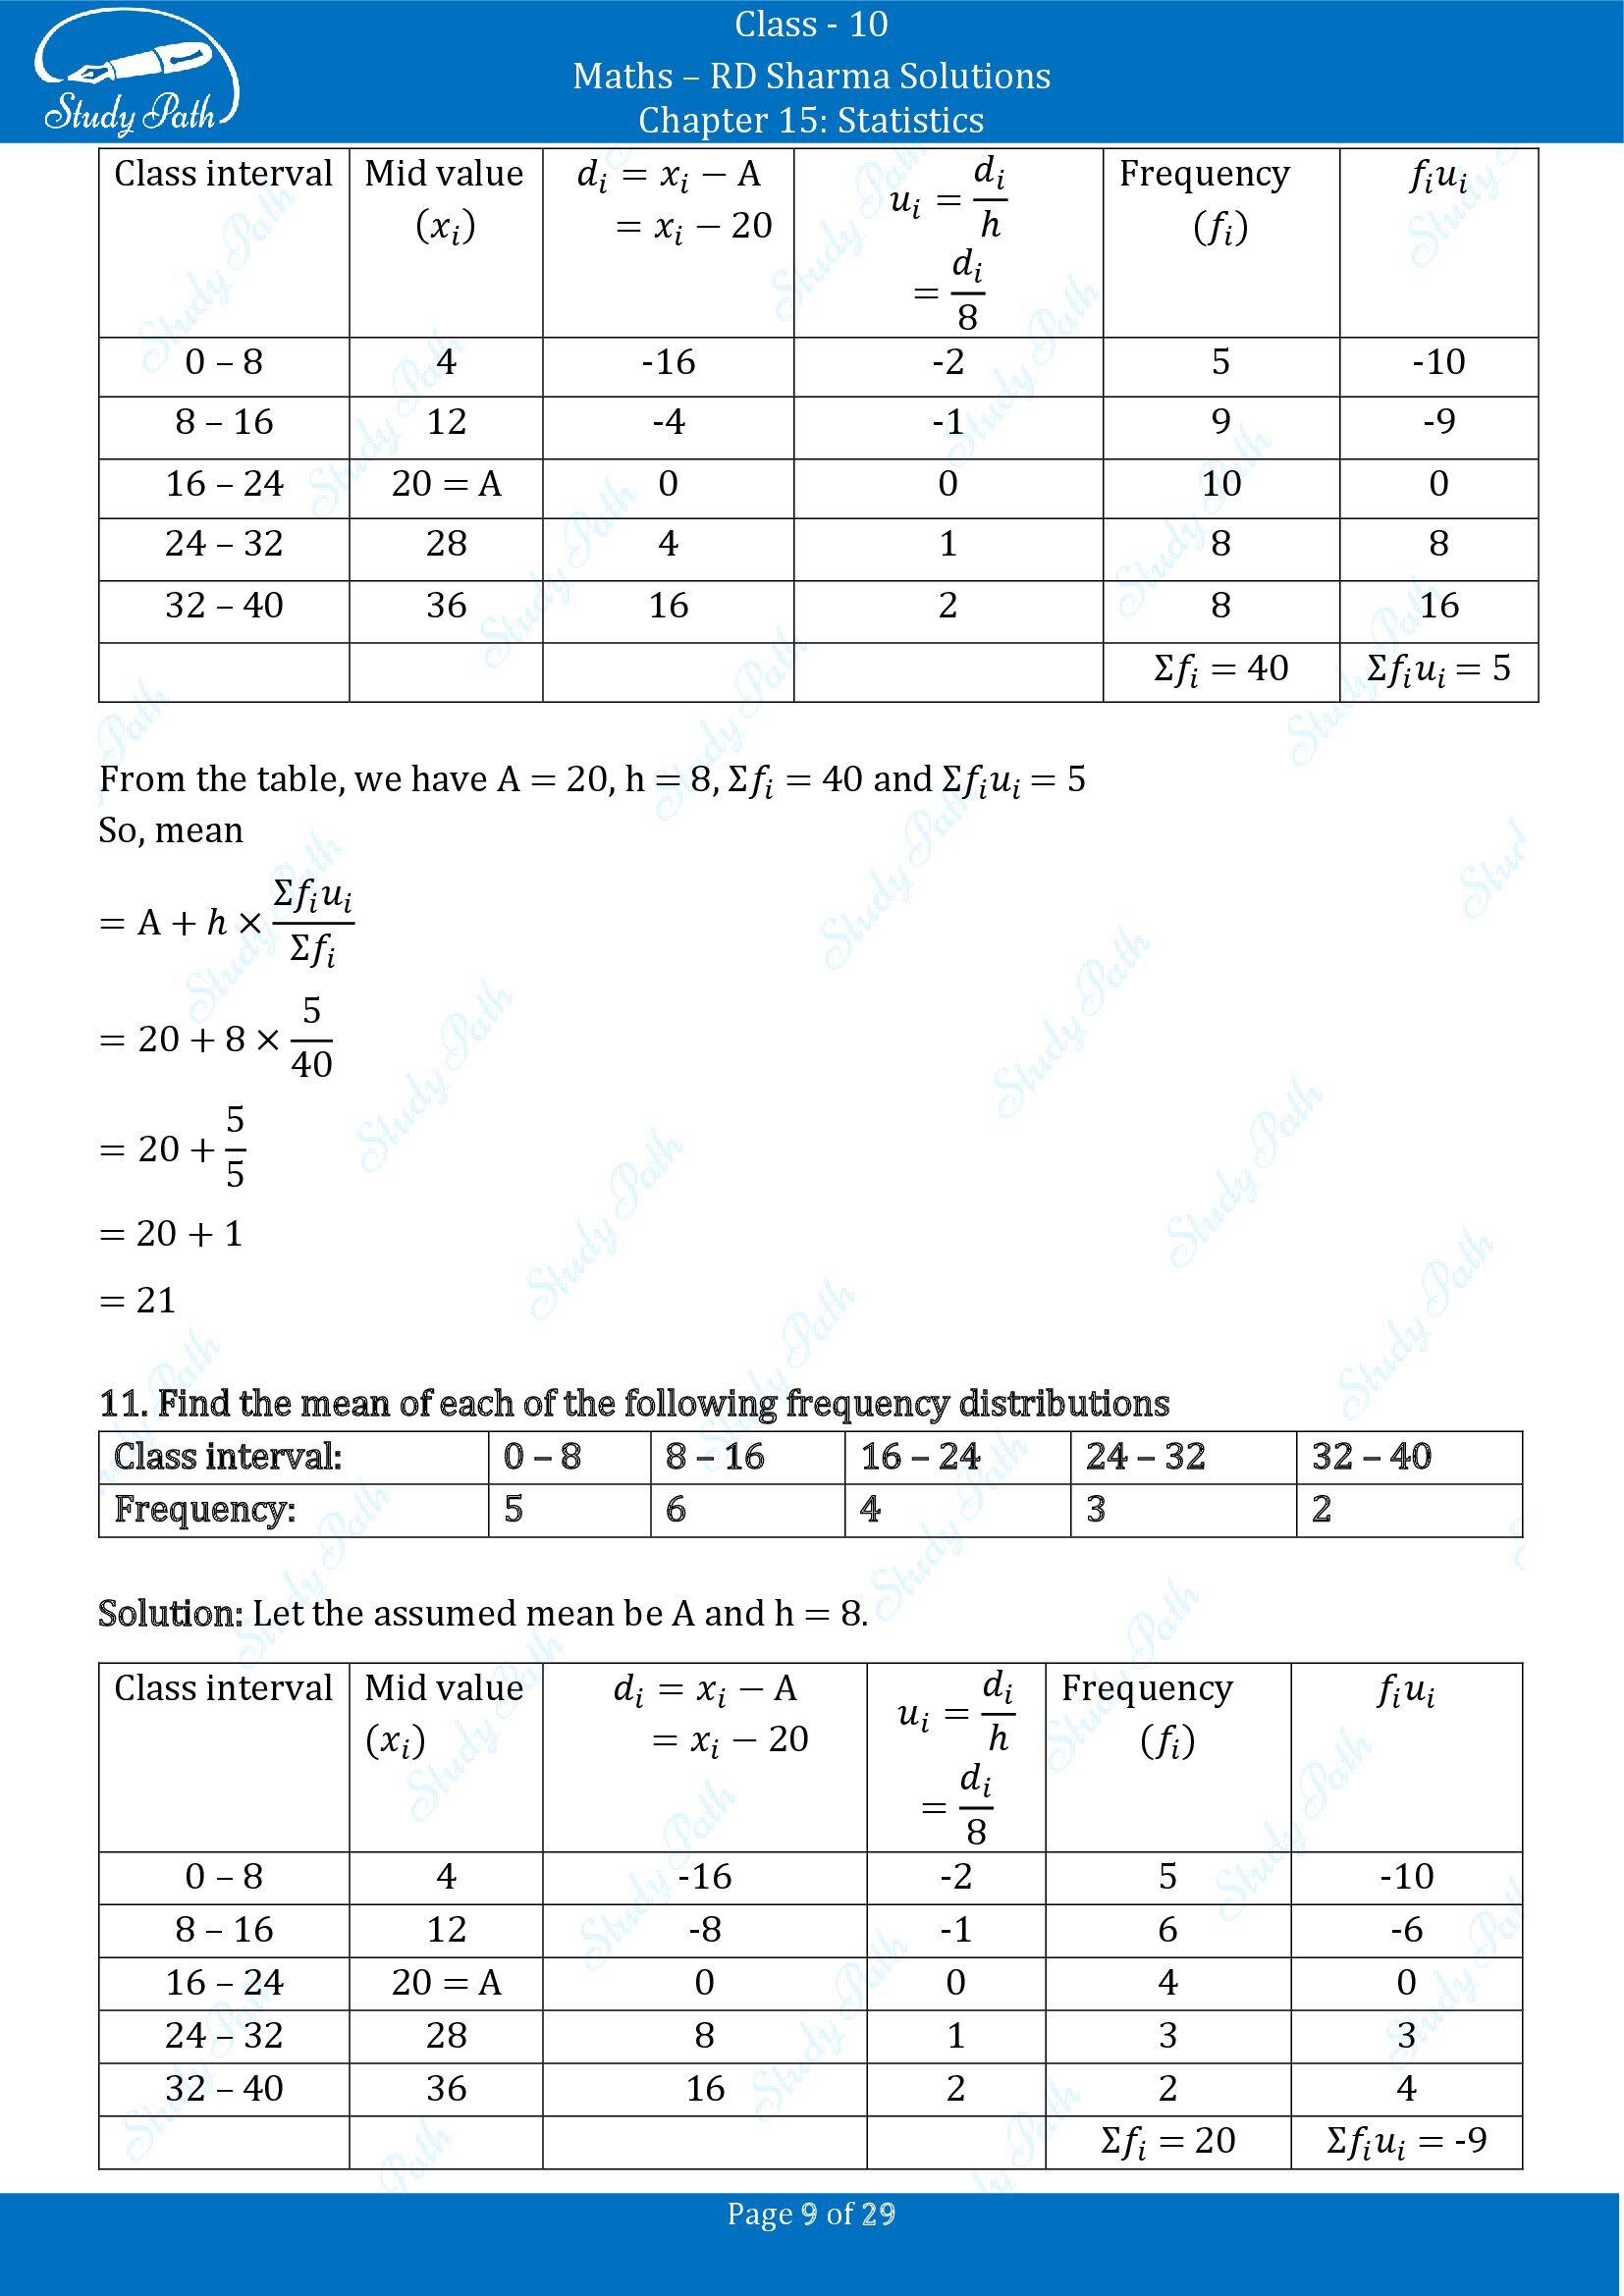 RD Sharma Solutions Class 10 Chapter 15 Statistics Exercise 15.3 0009